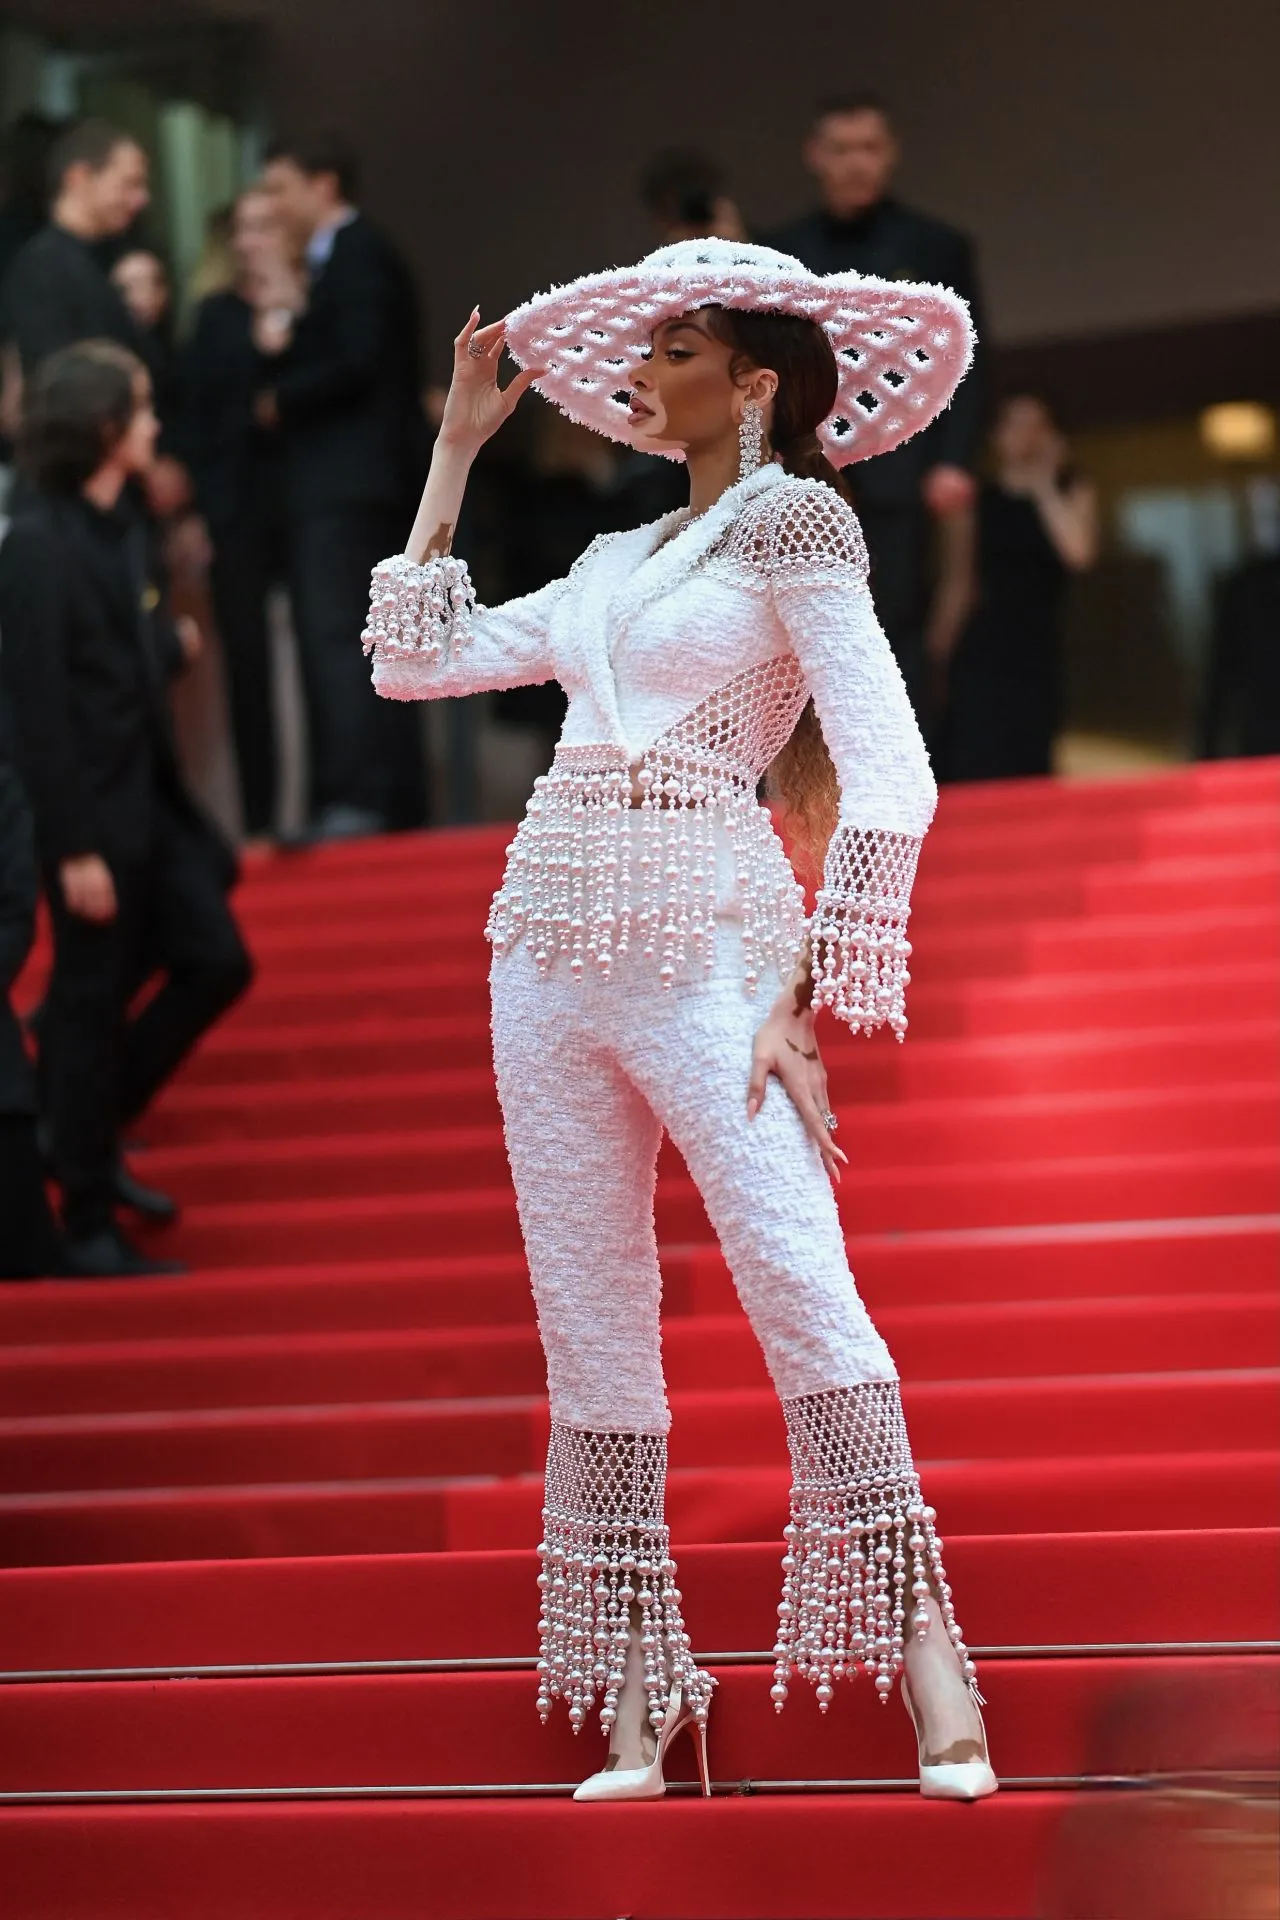 WINNIE HARLOW AT THE APPRENTICE PREMIERE AT CANNES FILM FESTIVAL3